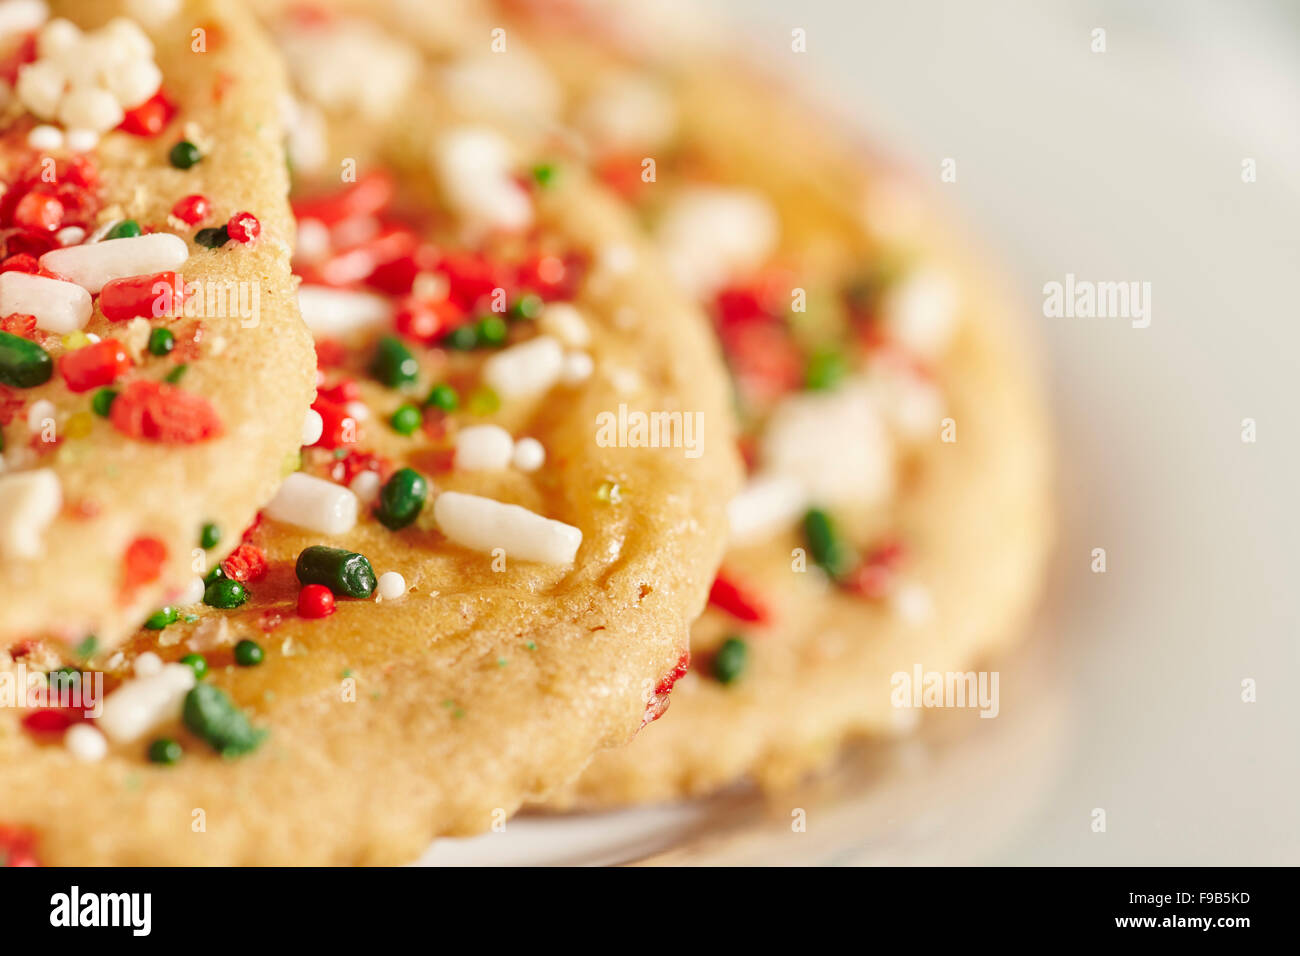 Sand Tarts with Christmas Decorations Stock Photo